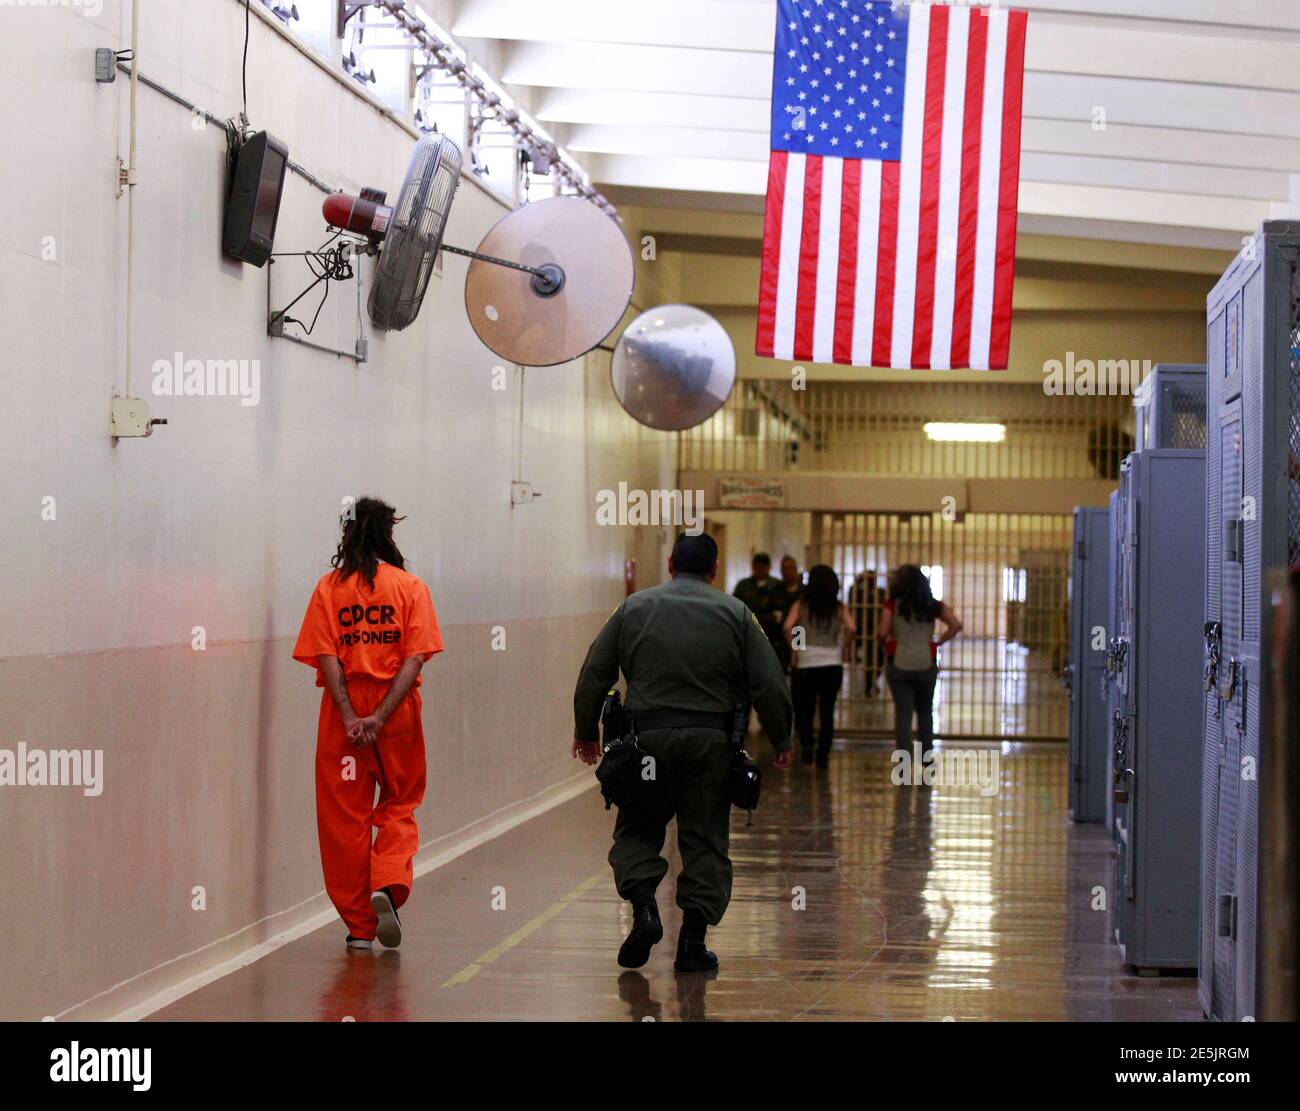 An inmate is led by a prison guard at the California Institution for Men state prison in Chino, California, June 3, 2011. The Supreme Court has ordered California to release more than 30,000 inmates over the next two years or take other steps to ease overcrowding in its prisons to prevent "needless suffering and death." California's 33 adult prisons were designed to hold about 80,000 inmates and now have about 145,000. The U.S. has more than 2 million people in state and local prisons. It has long had the highest incarceration rate in the world. REUTERS/Lucy Nicholson (UNITED STATES - Tags: CR Stock Photo